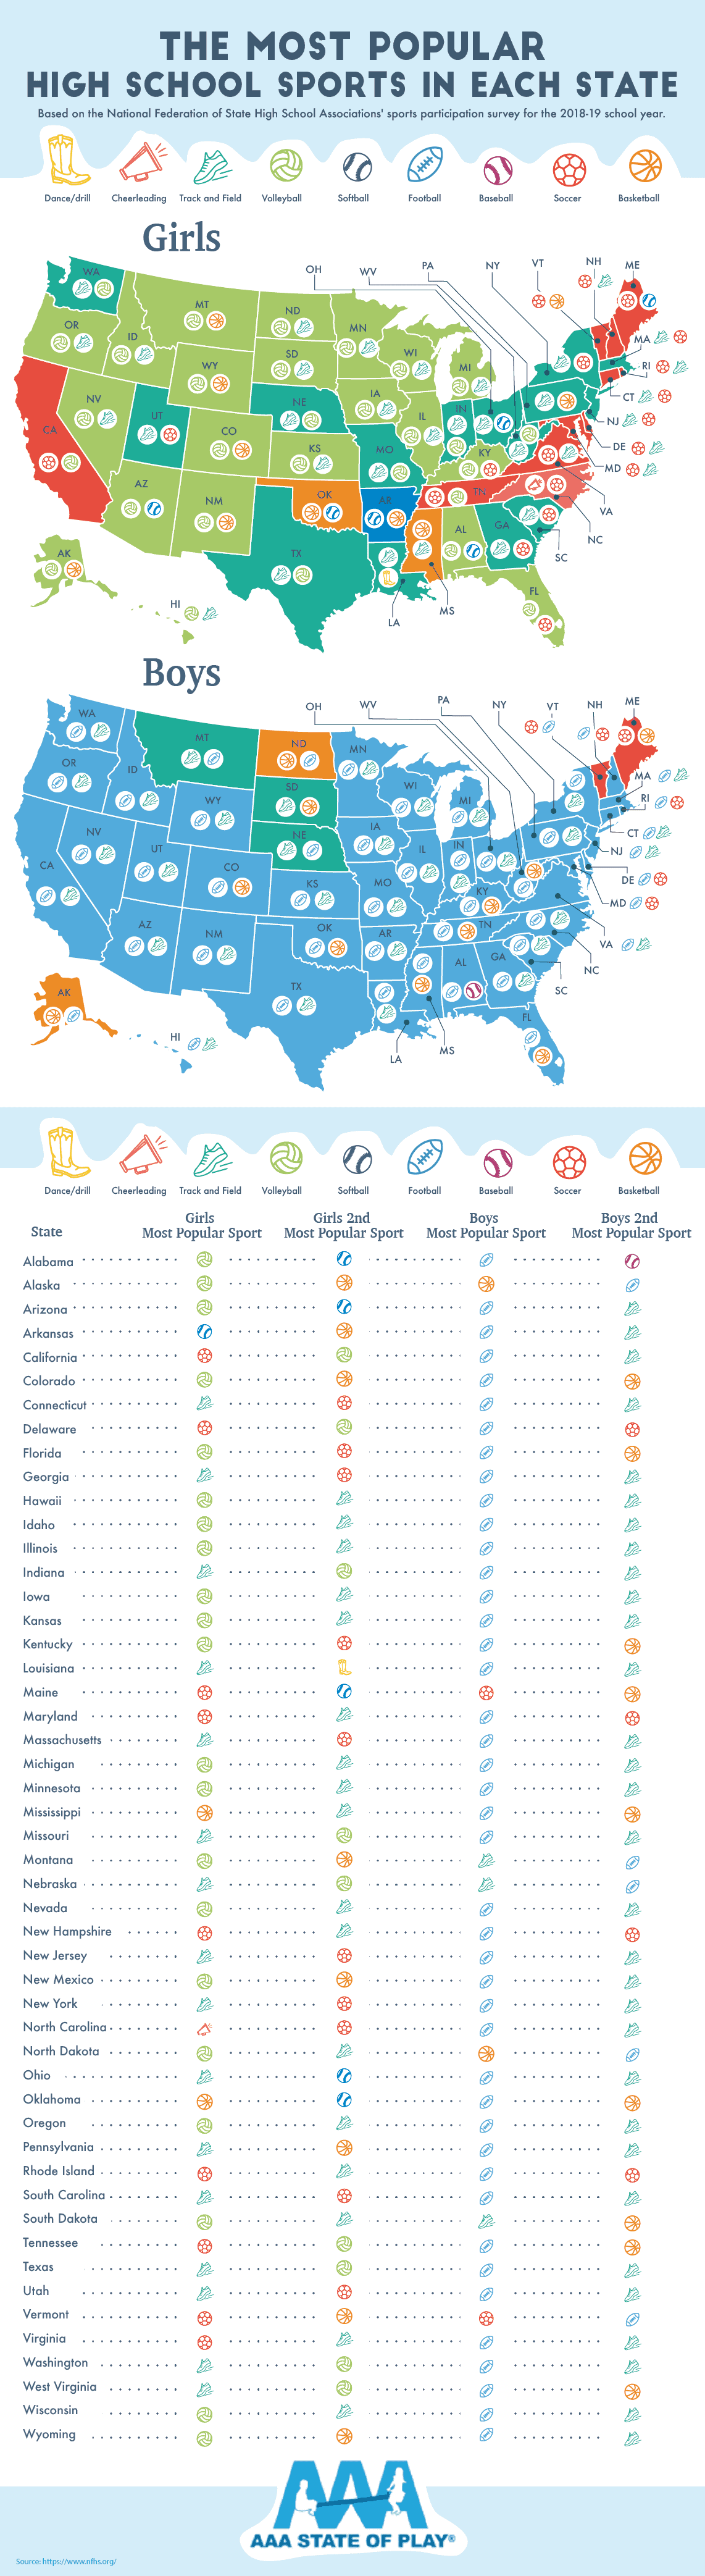 The High School Sports With the Most Participation by State